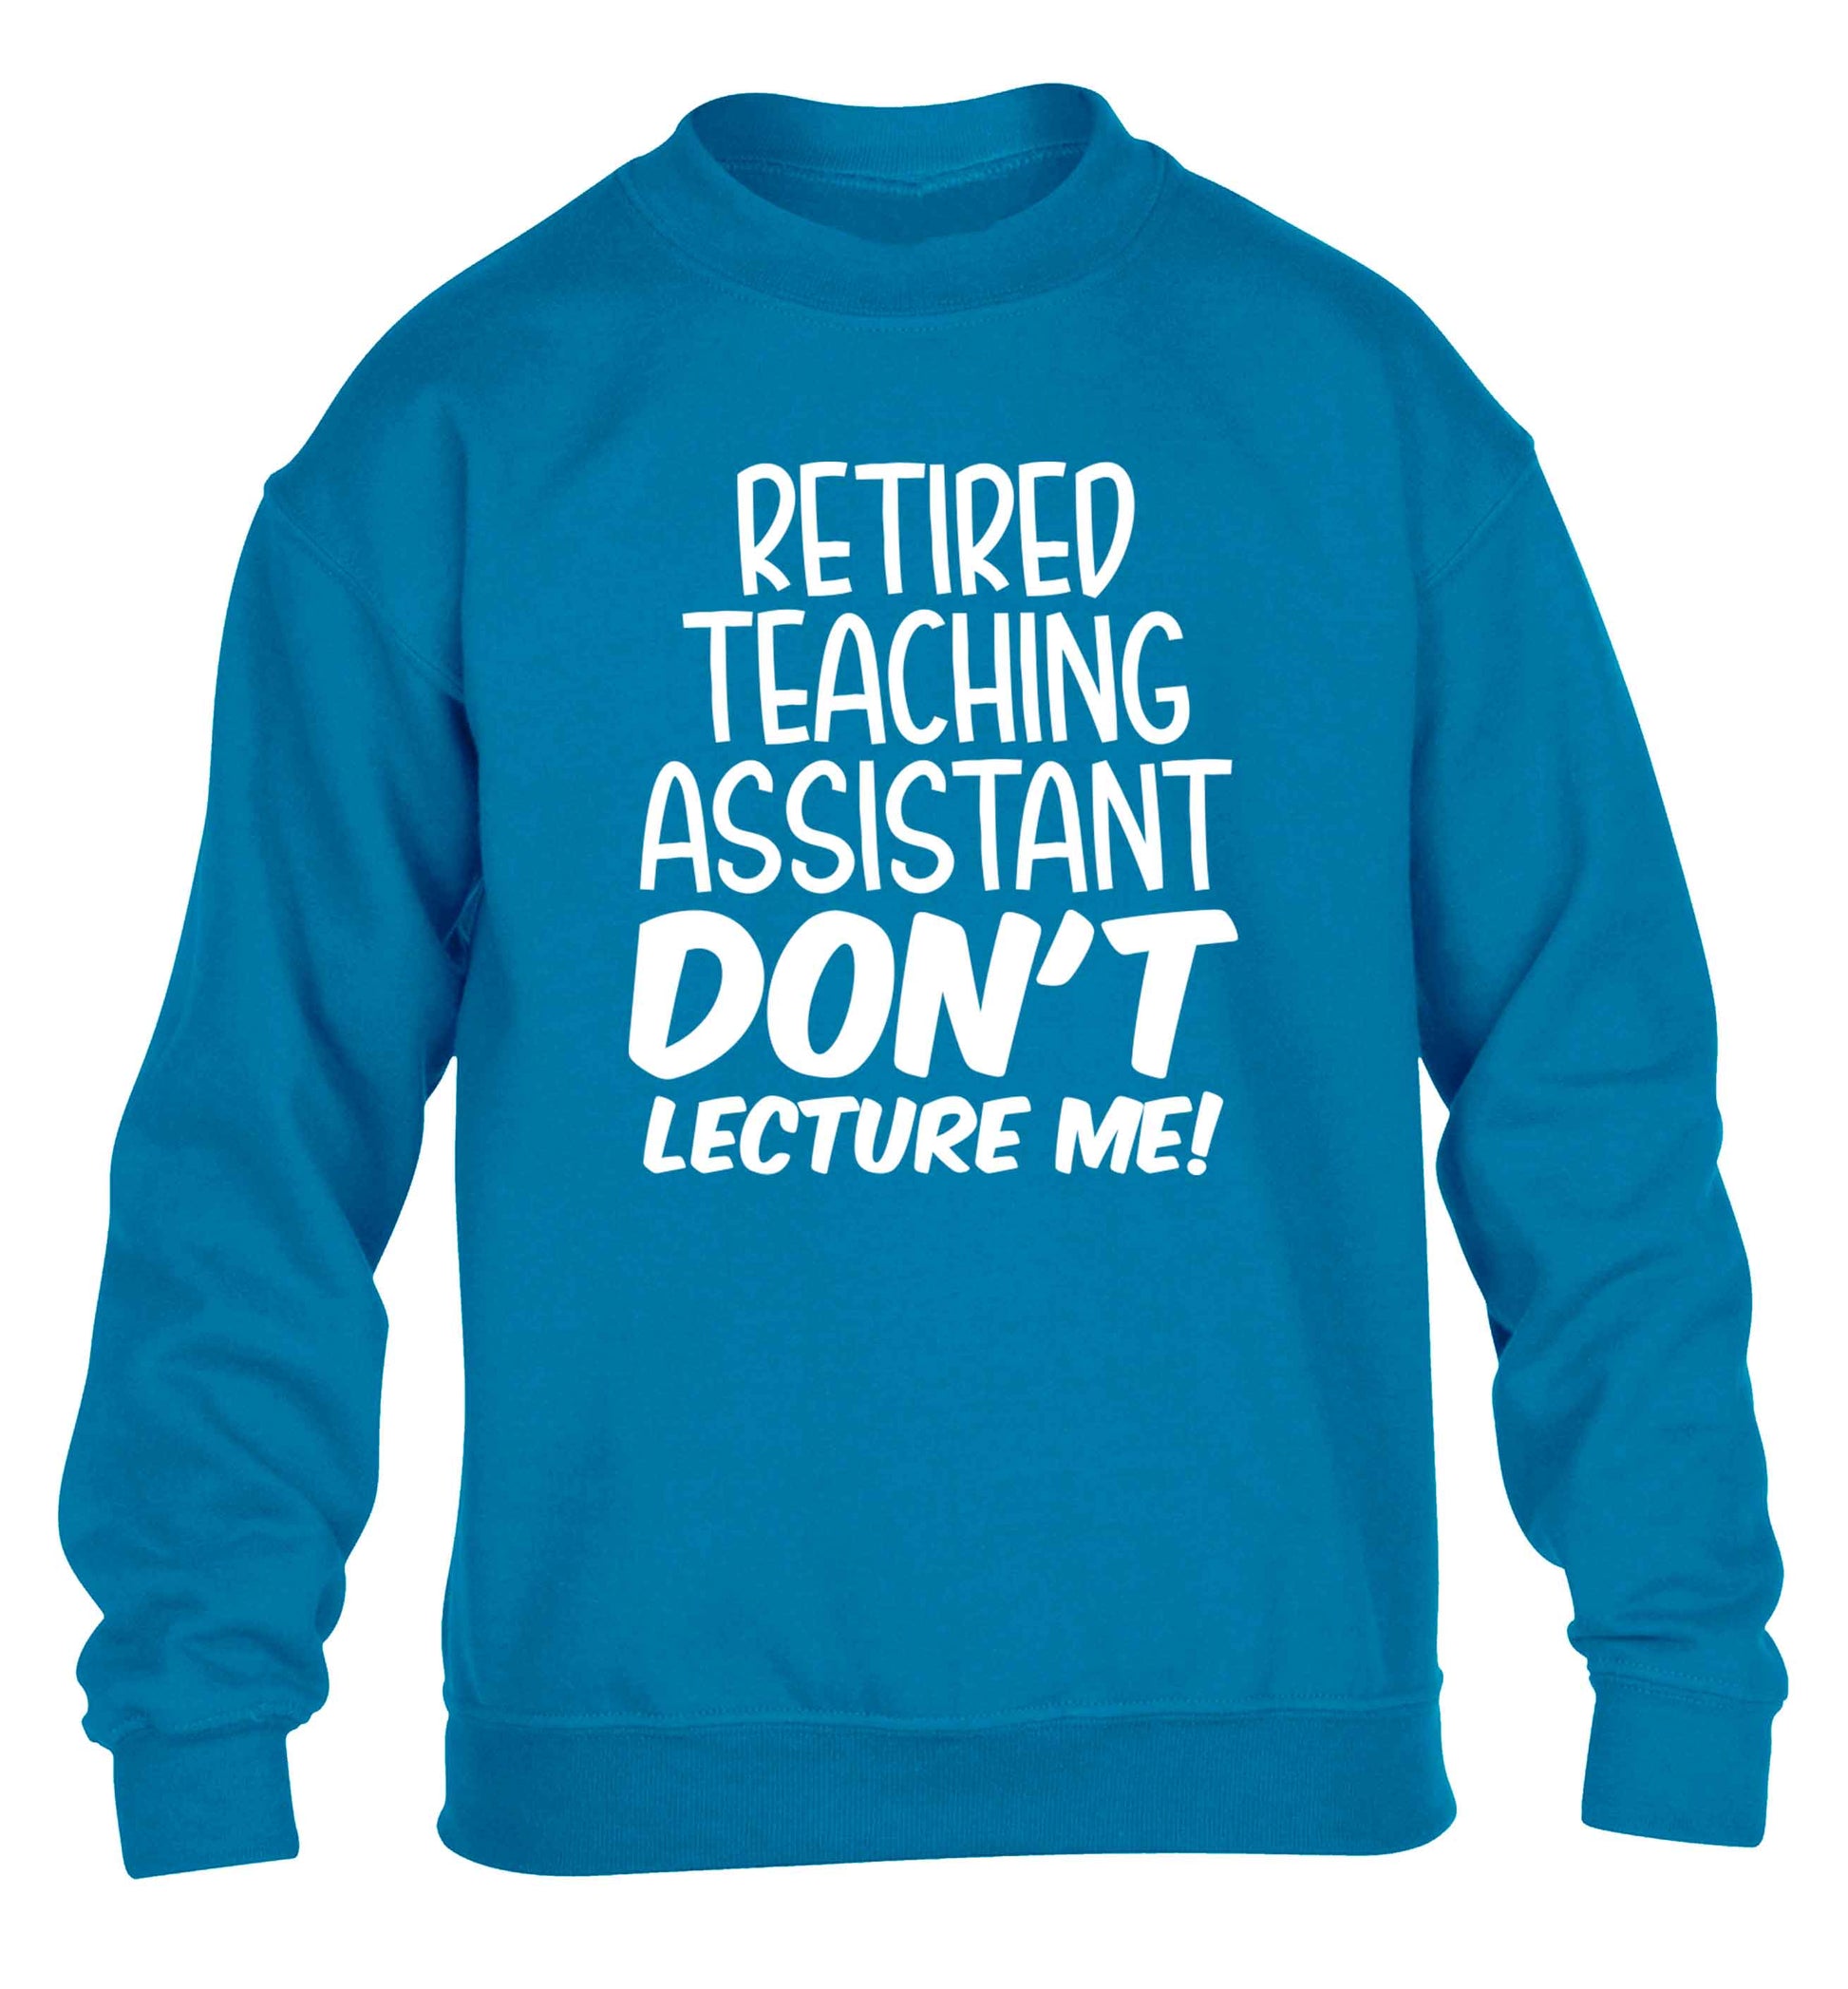 Retired teaching assistant don't lecture me children's blue sweater 12-13 Years